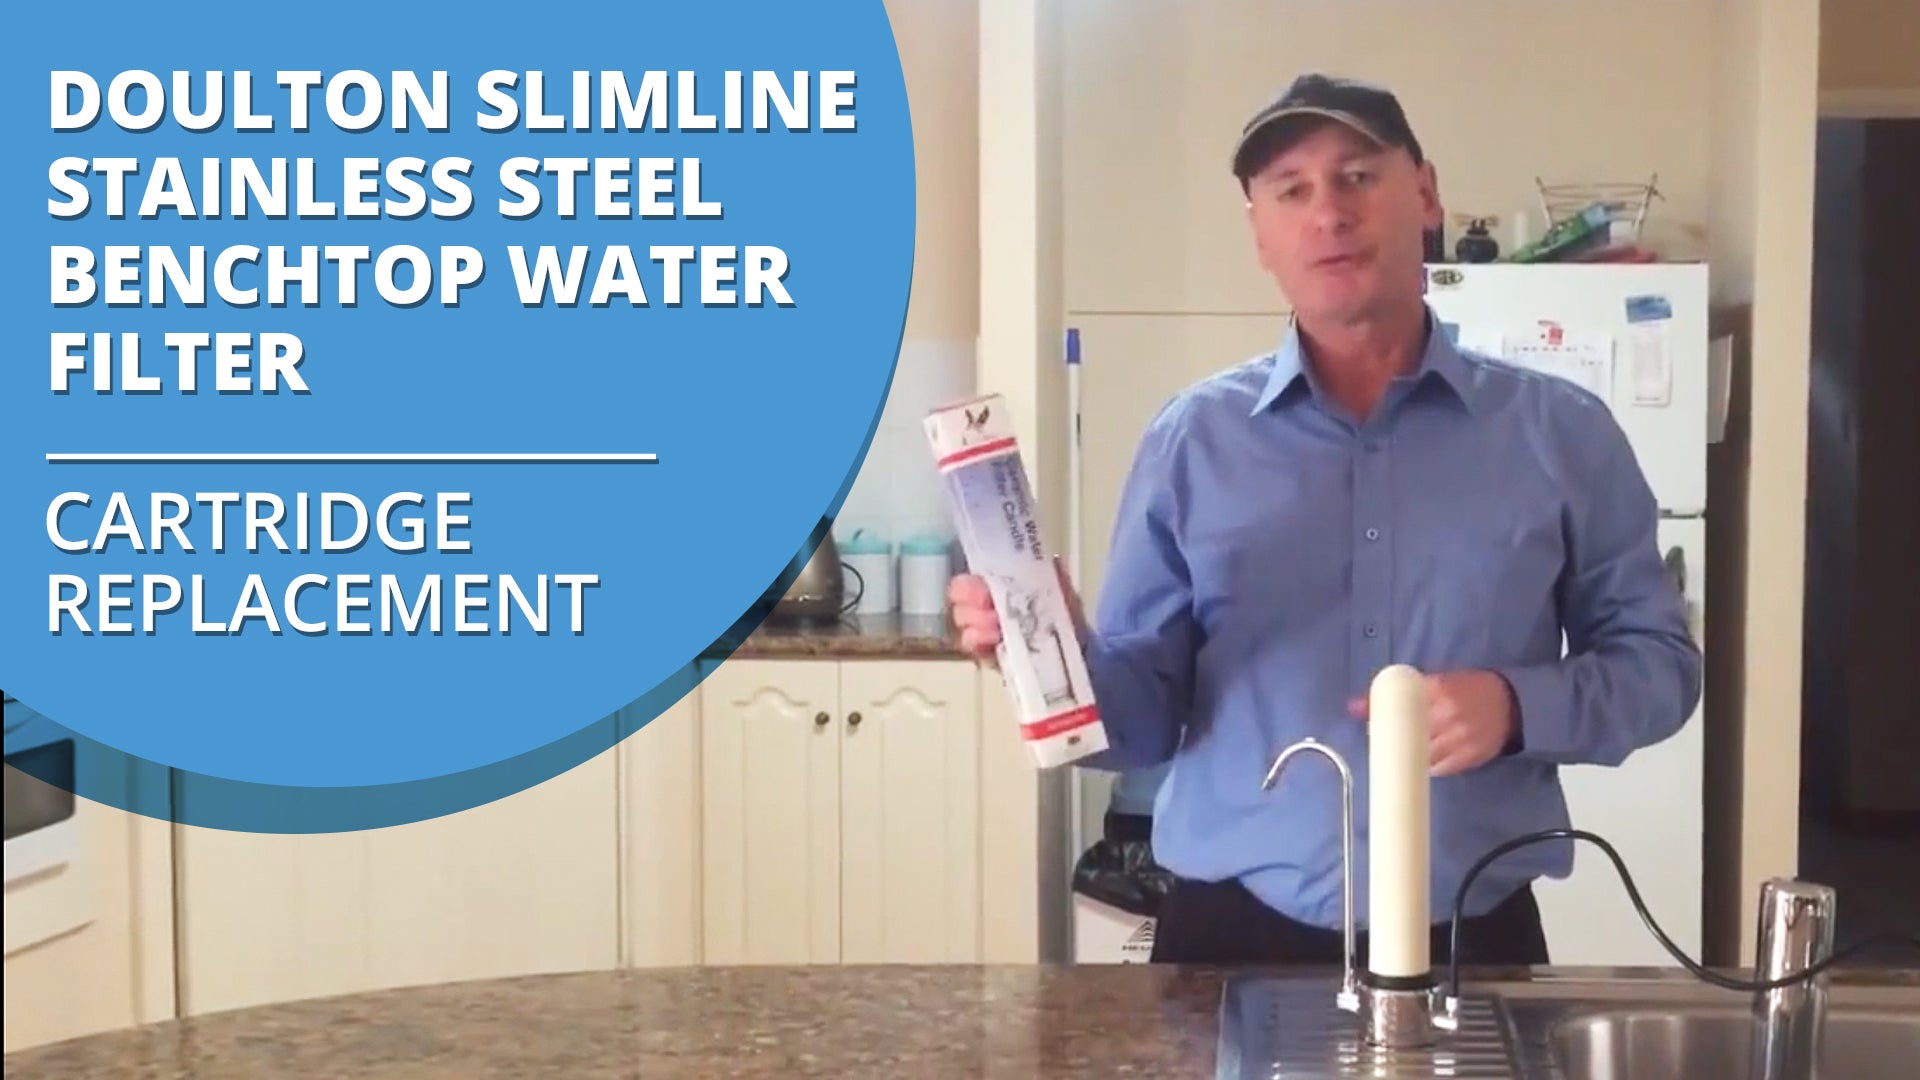 [VIDEO] Doulton Ultracarb Slimline Stainless Steel Benchtop Water Filter Cartridge Replacement Video